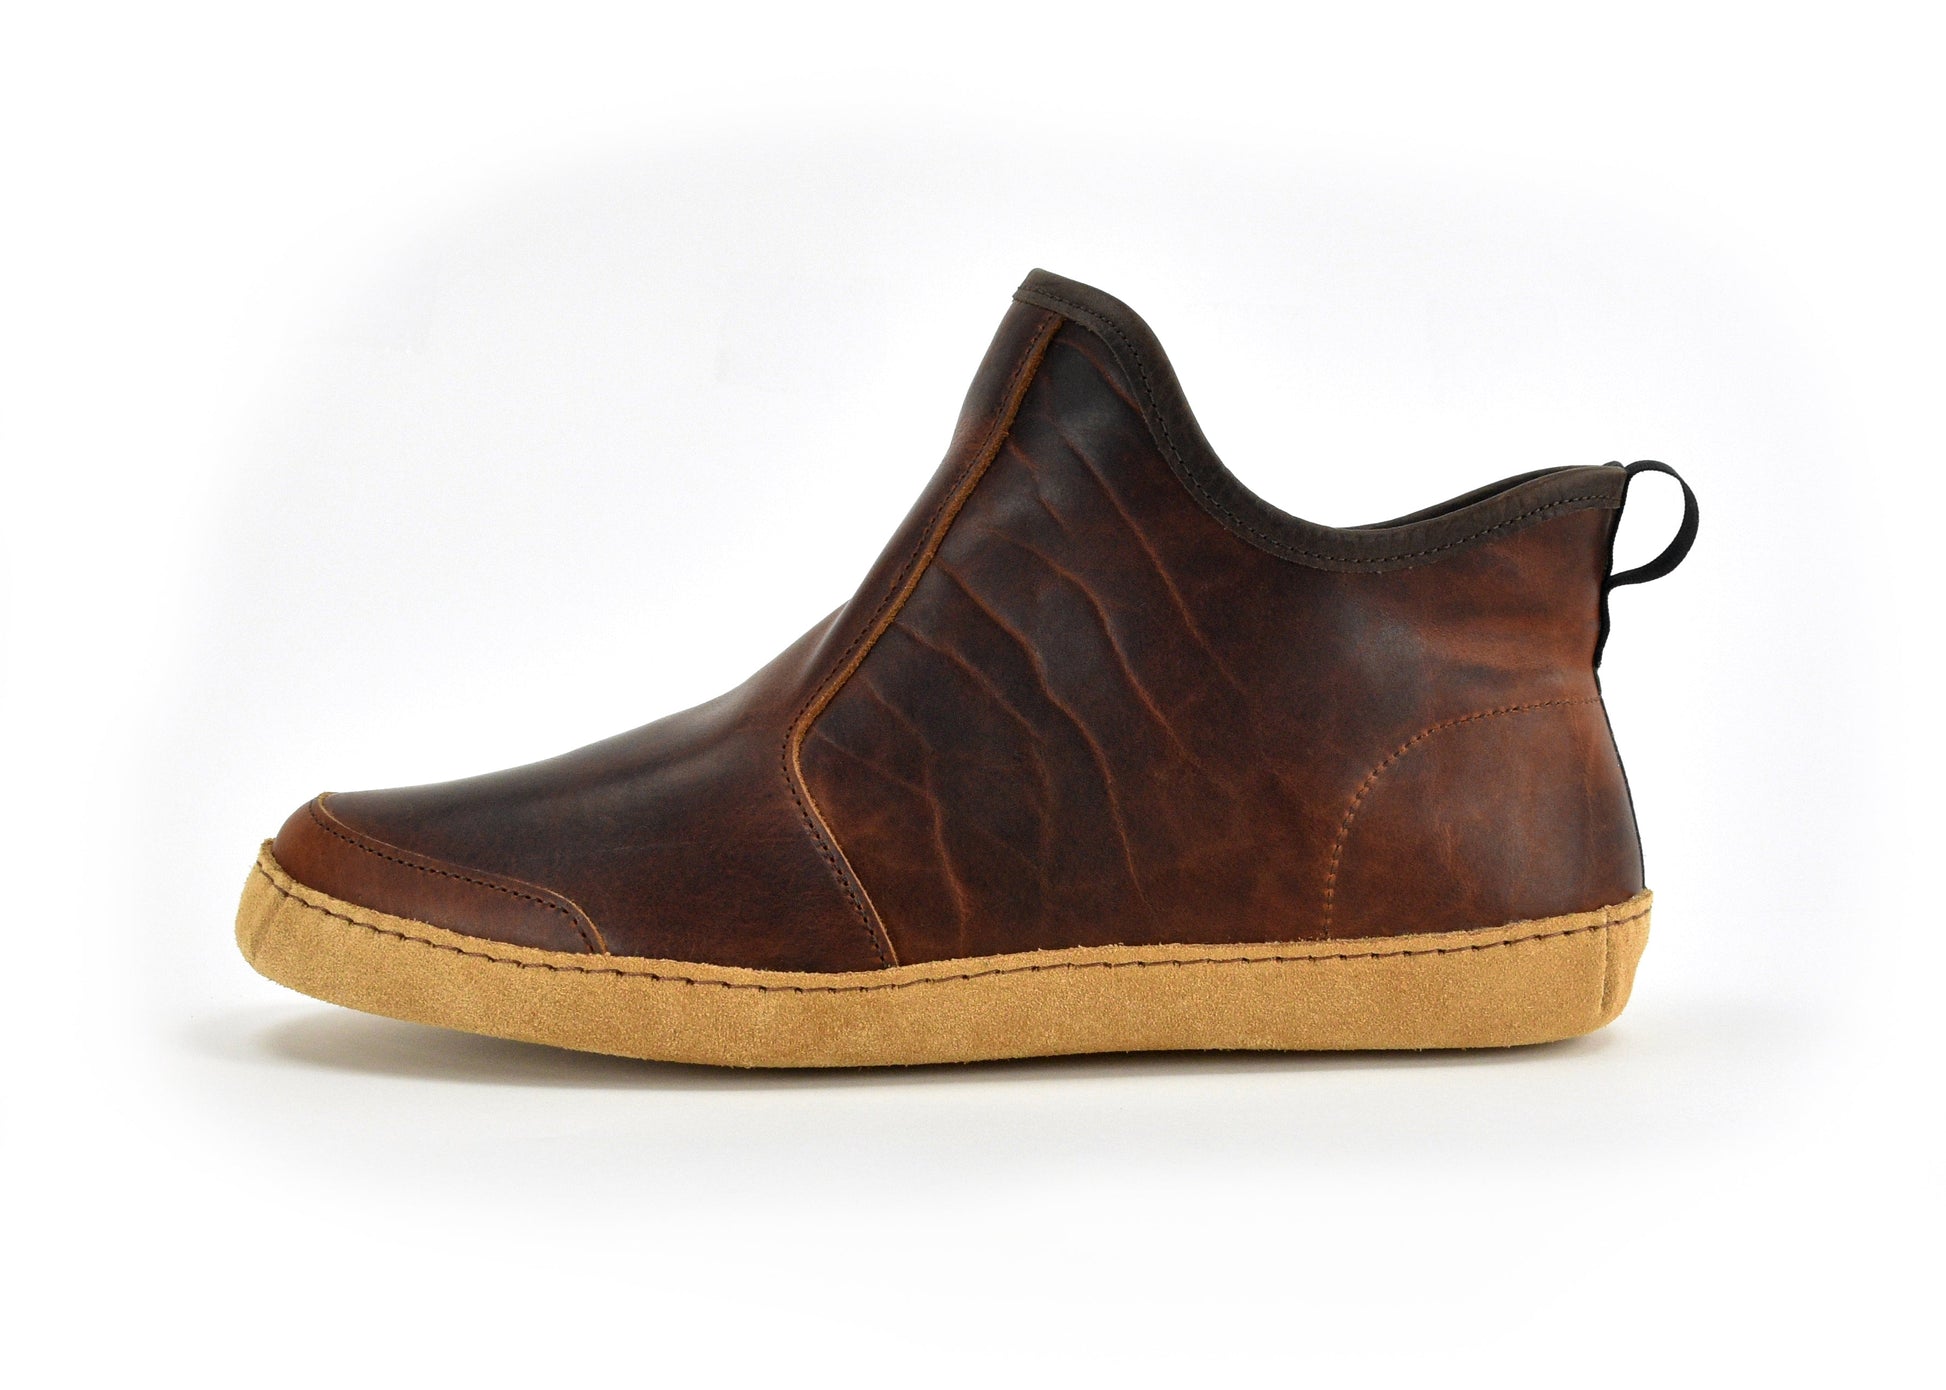 Vermont House Shoes - Hi-Top - Tobacco Bison side view